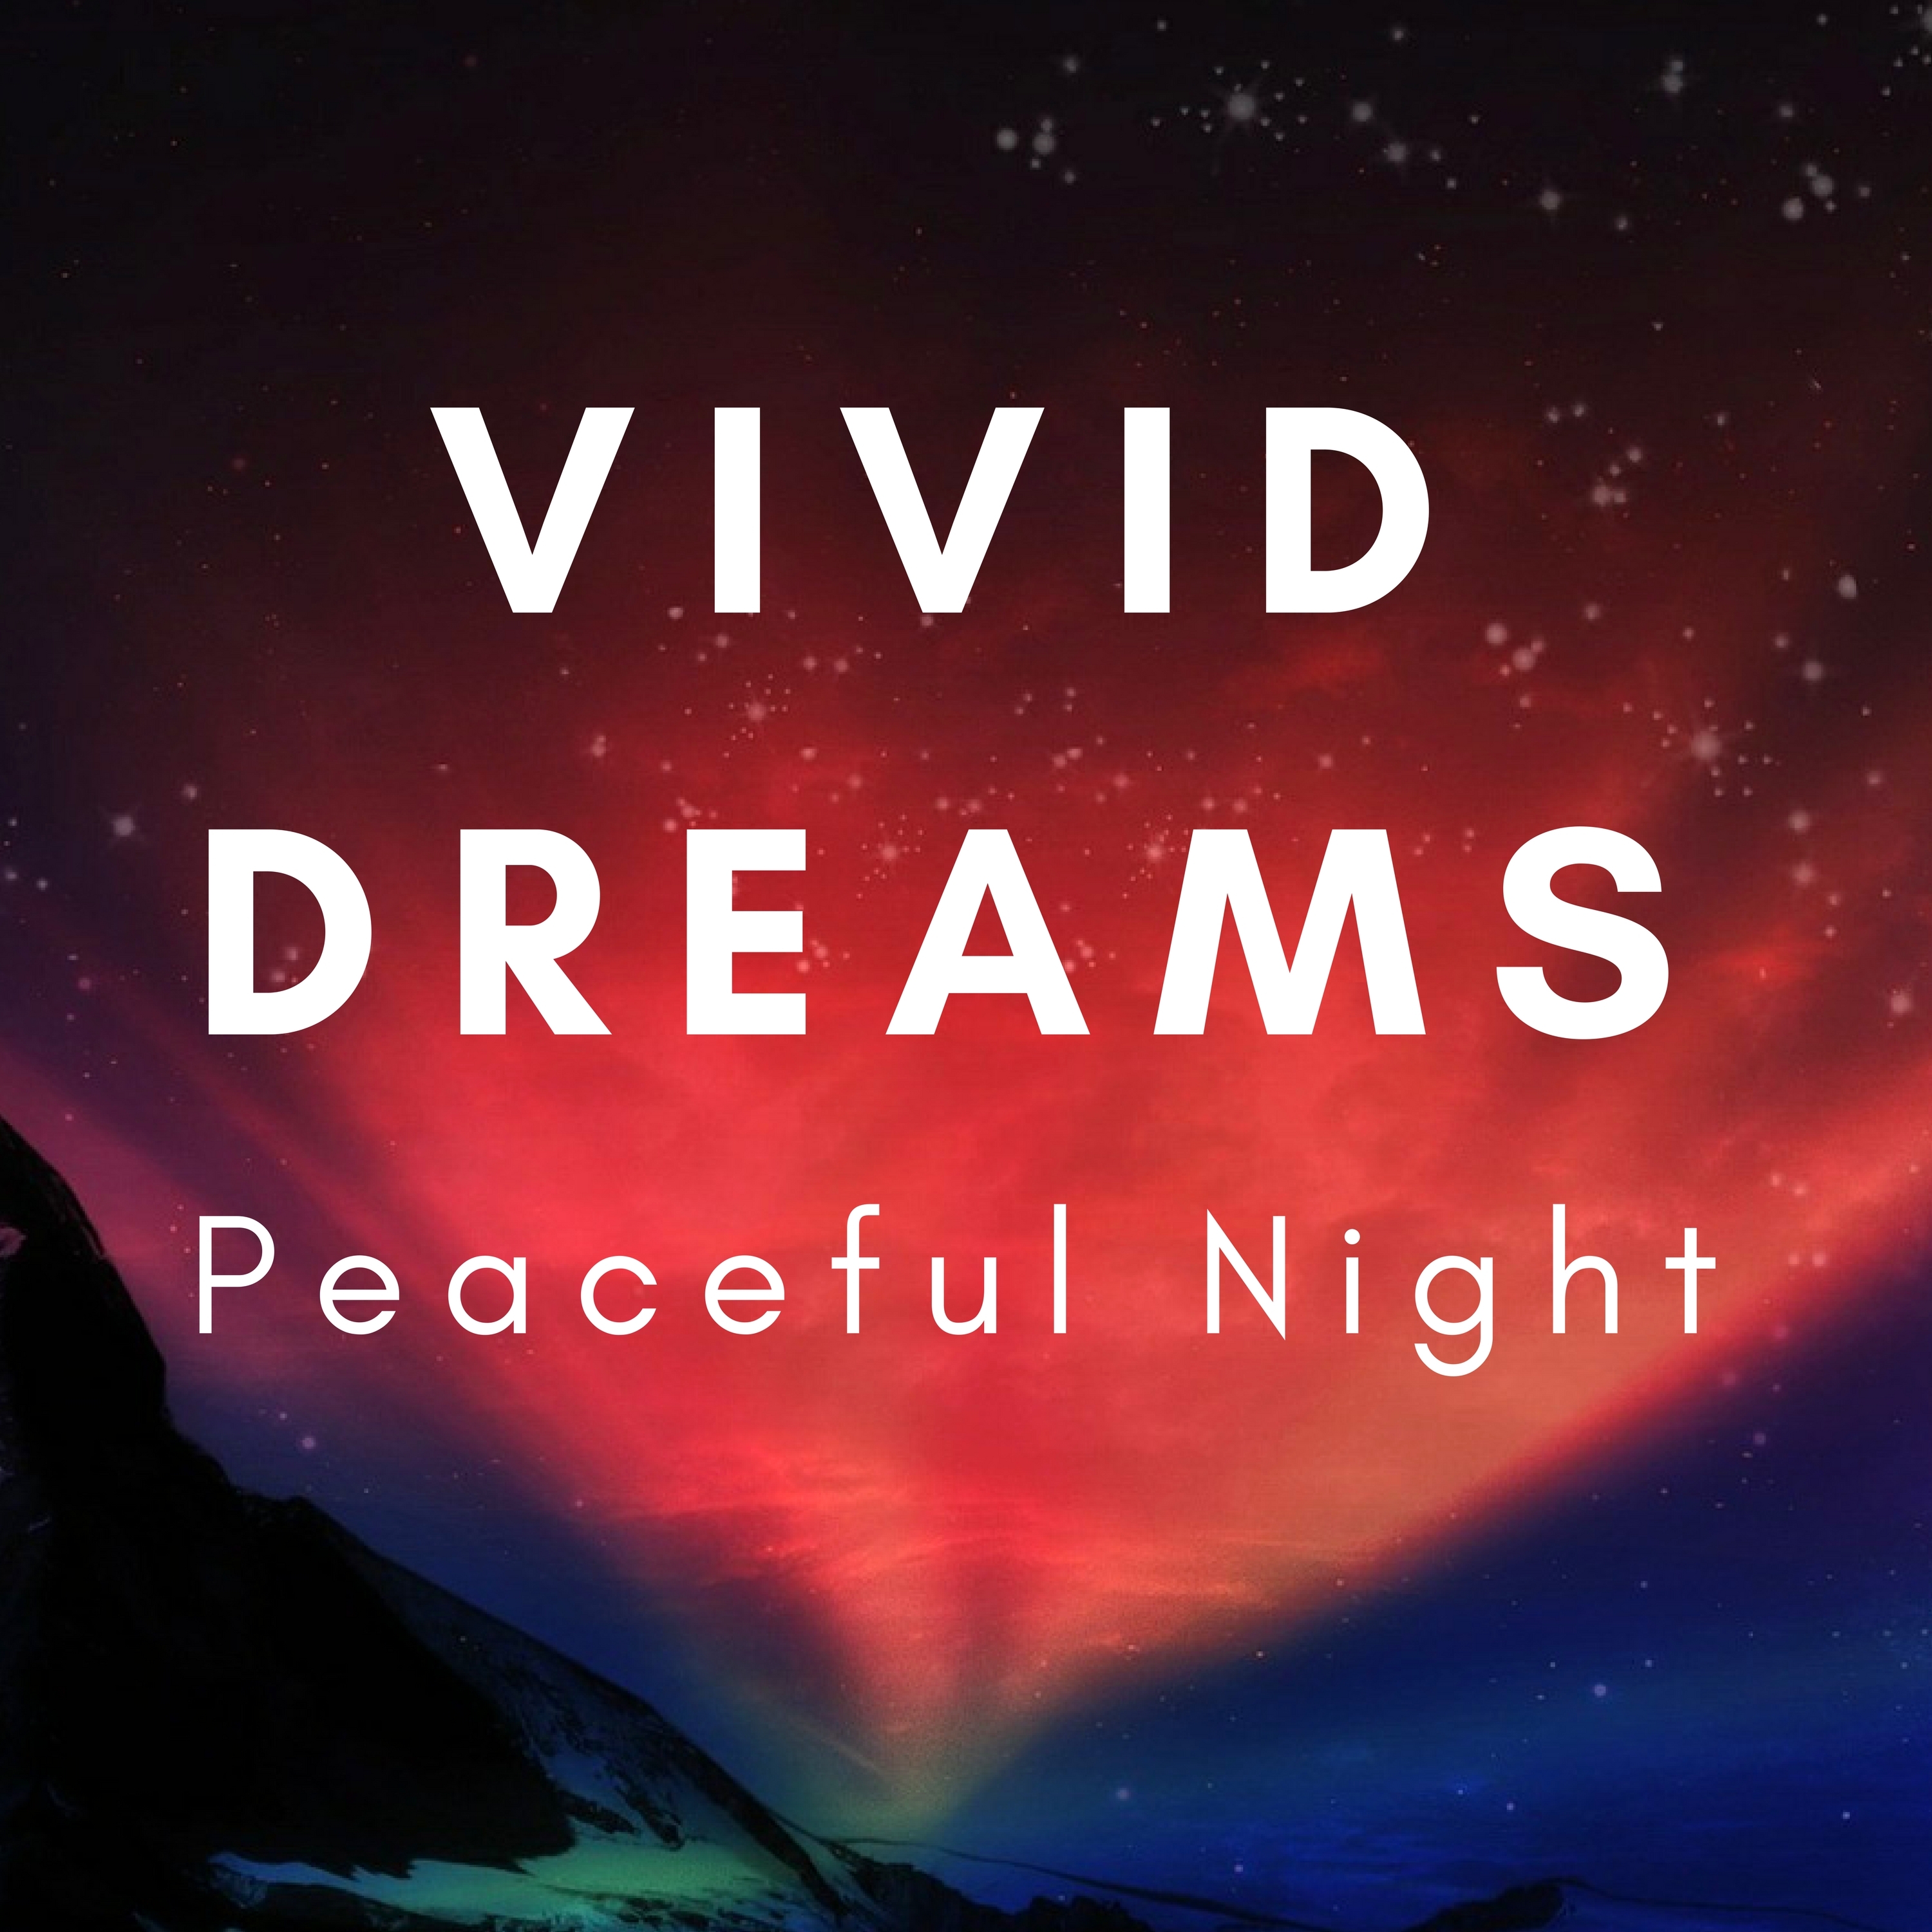 Vivid Dreams: Music for Sleep, Evening Relax, Peaceful Night, Lucid Visions, Relaxing Music with Nature Sounds